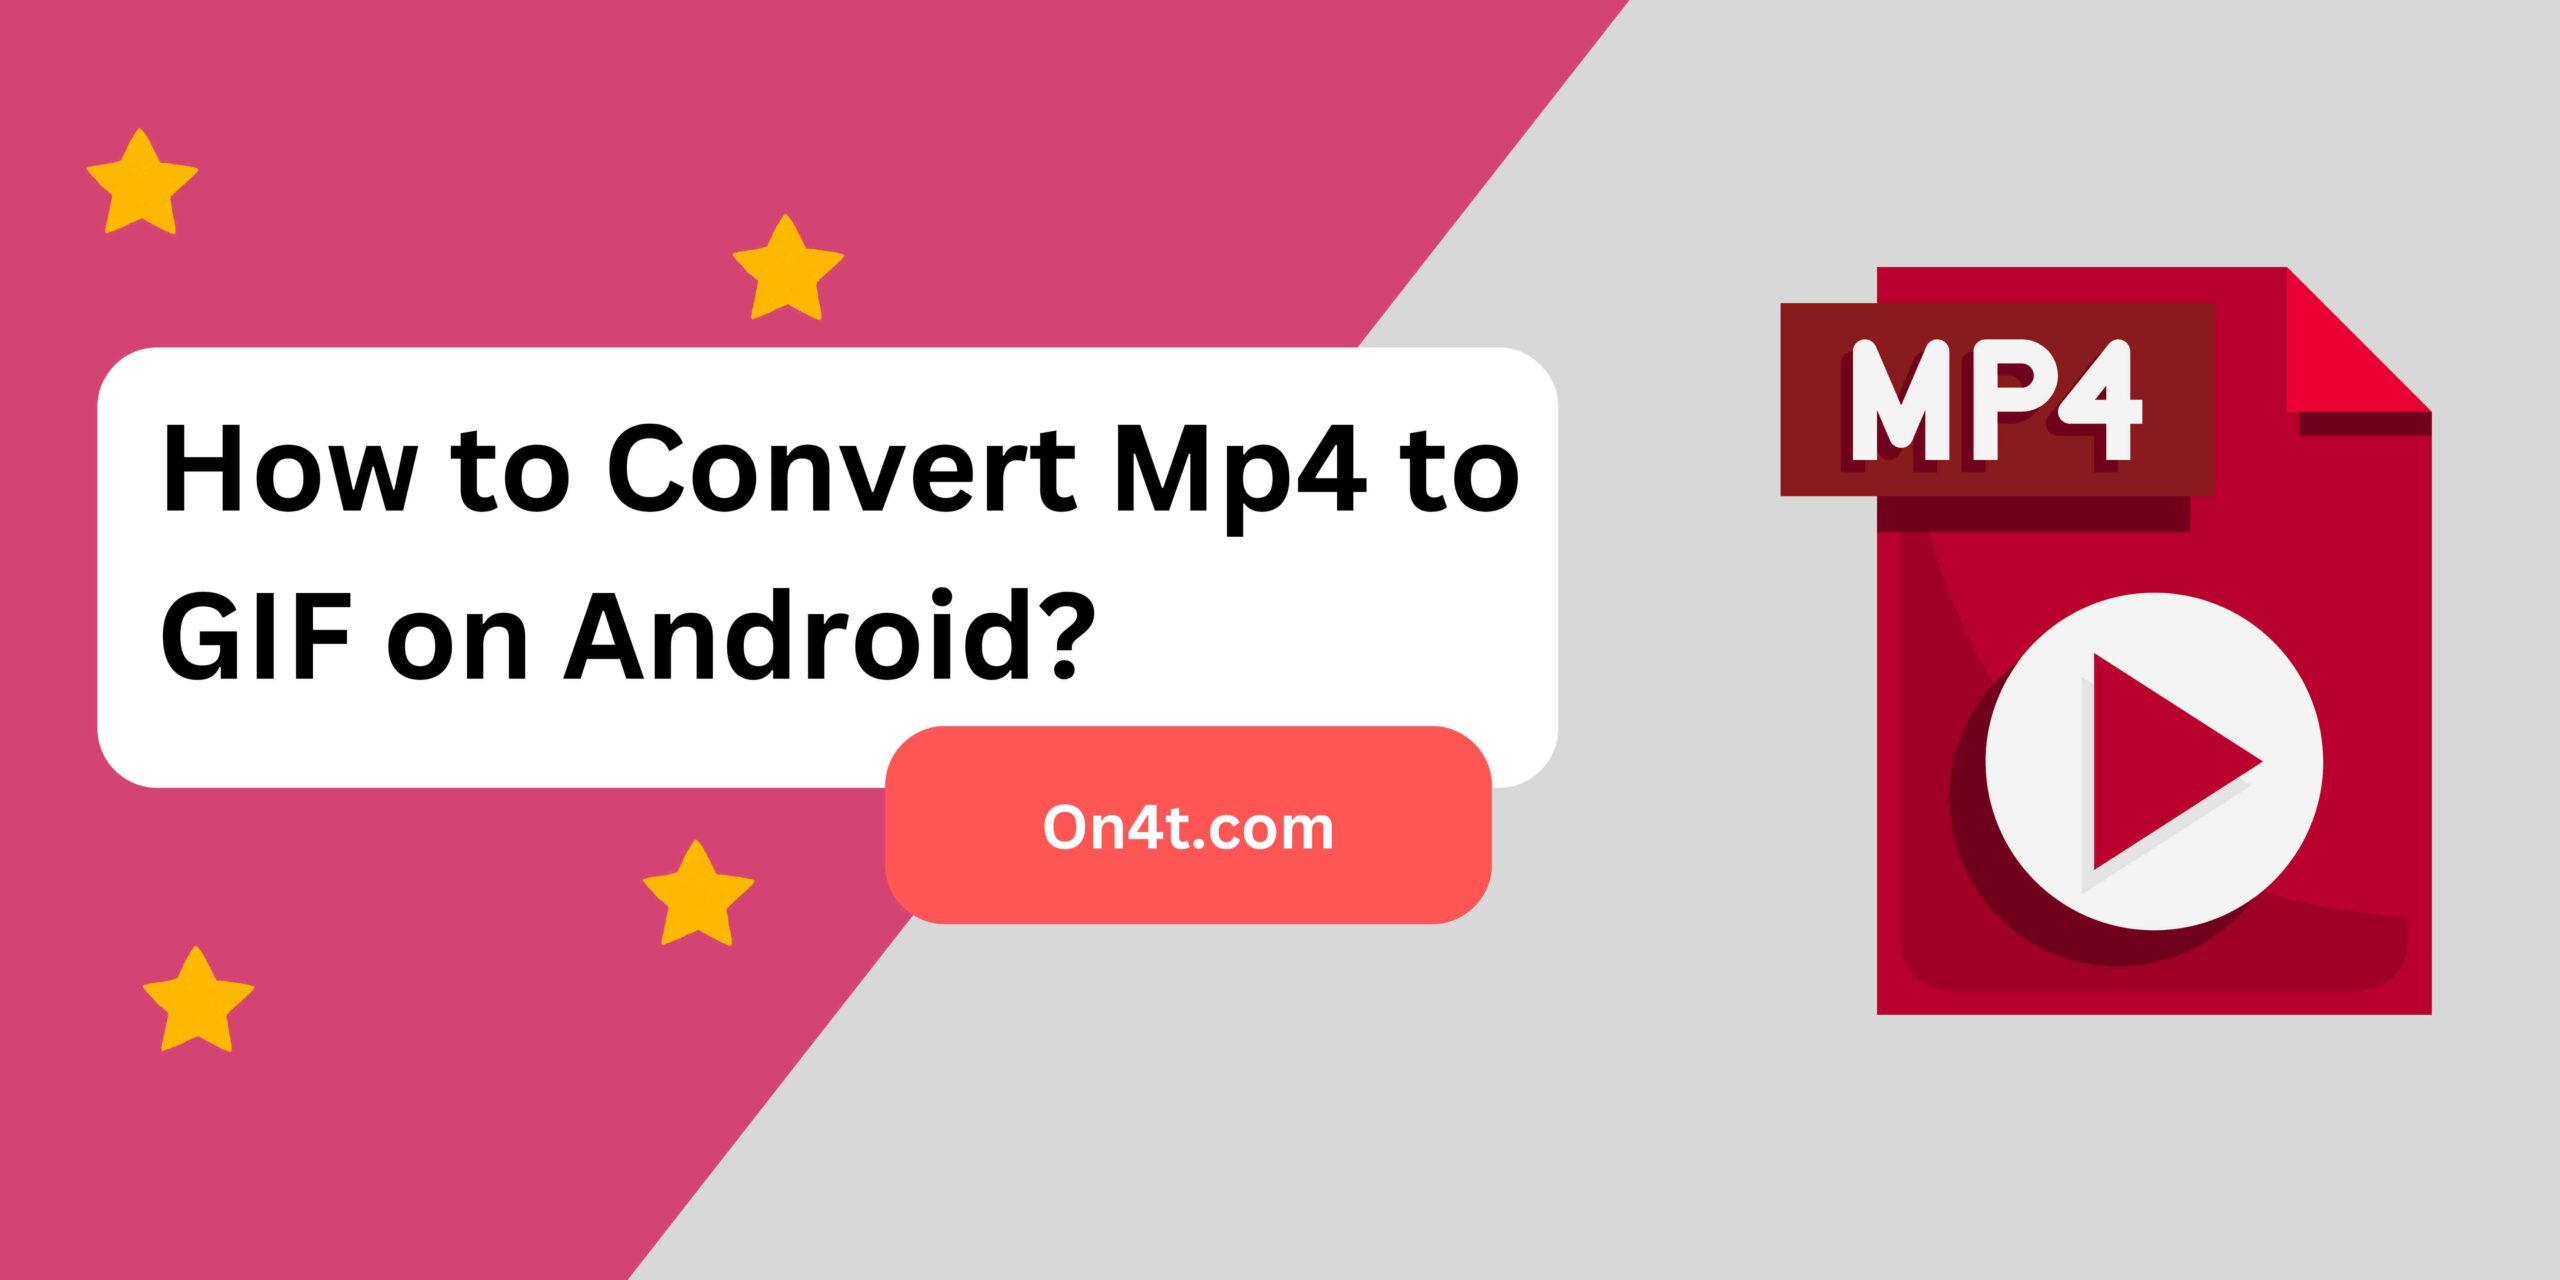 How to Convert Mp4 to GIF on Android?